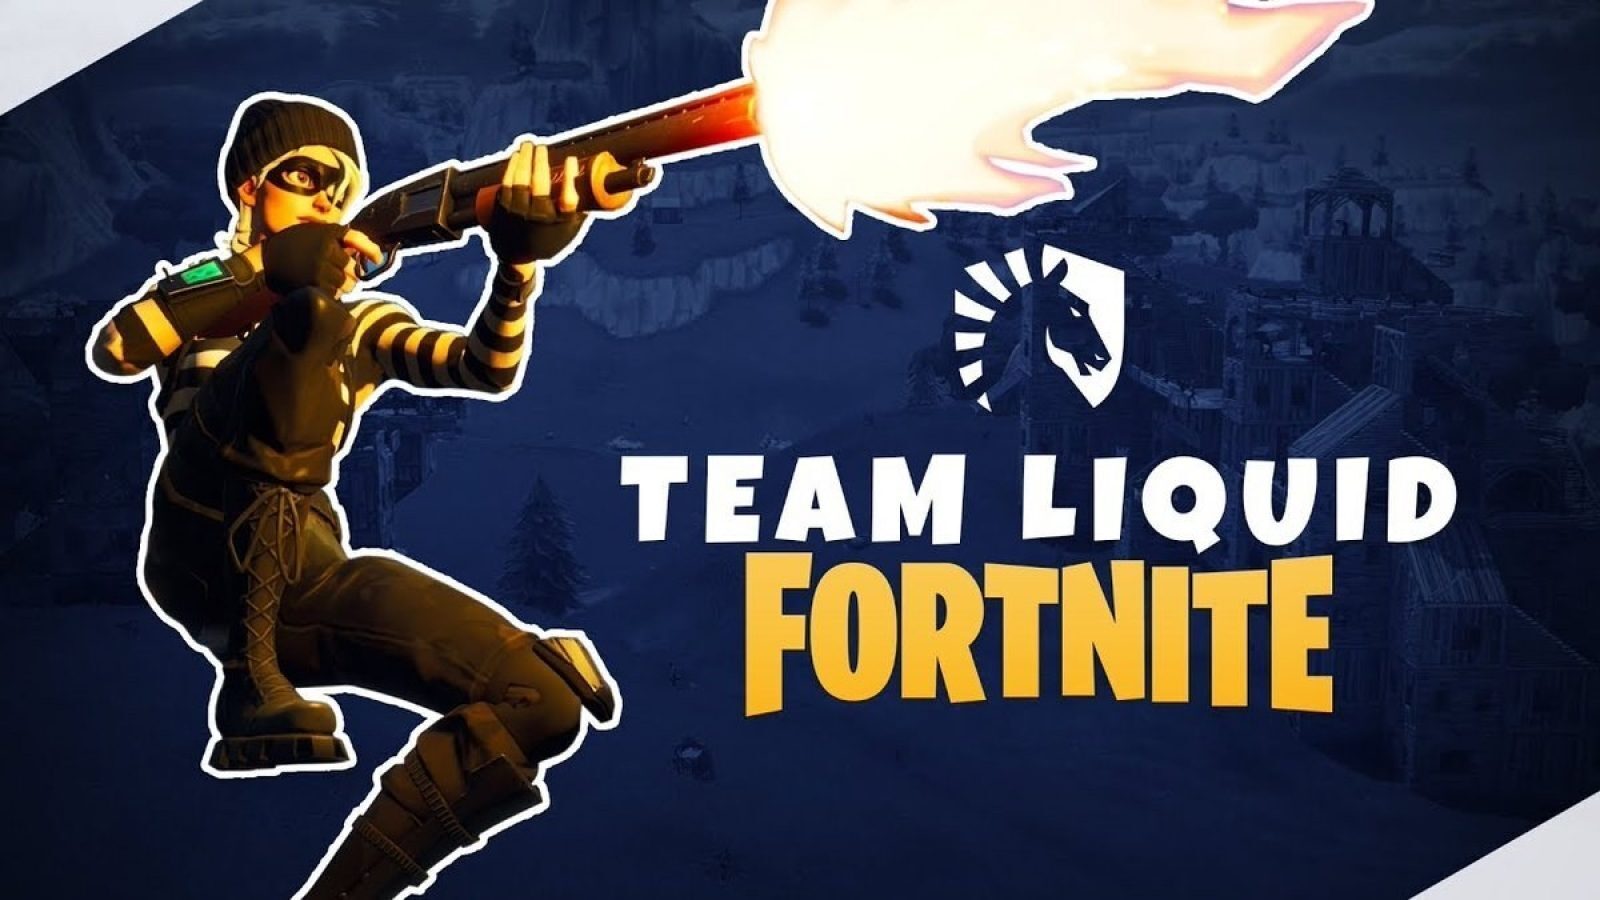 Team Liquid continues to add to their new Fortnite team by signing Noah "Vivid" Wright.